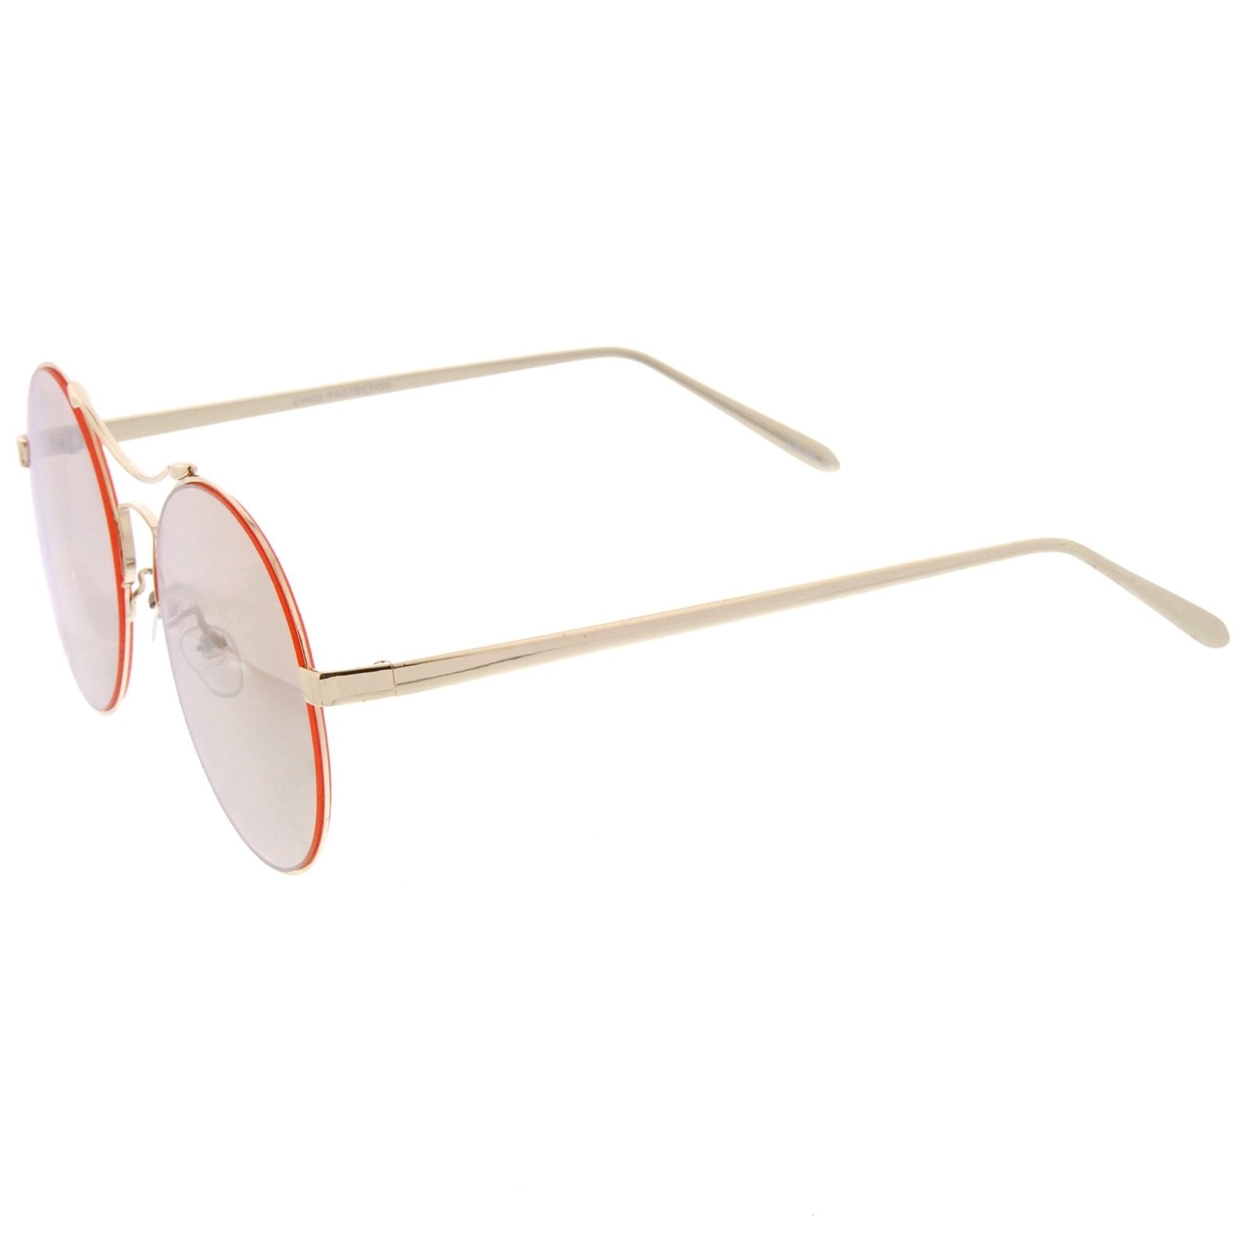 Modern Thin Metal Frame Curved Brow Bar Colored Mirror Flat Lens Round Sunglasses 55mm - Gold / Gold Mirror